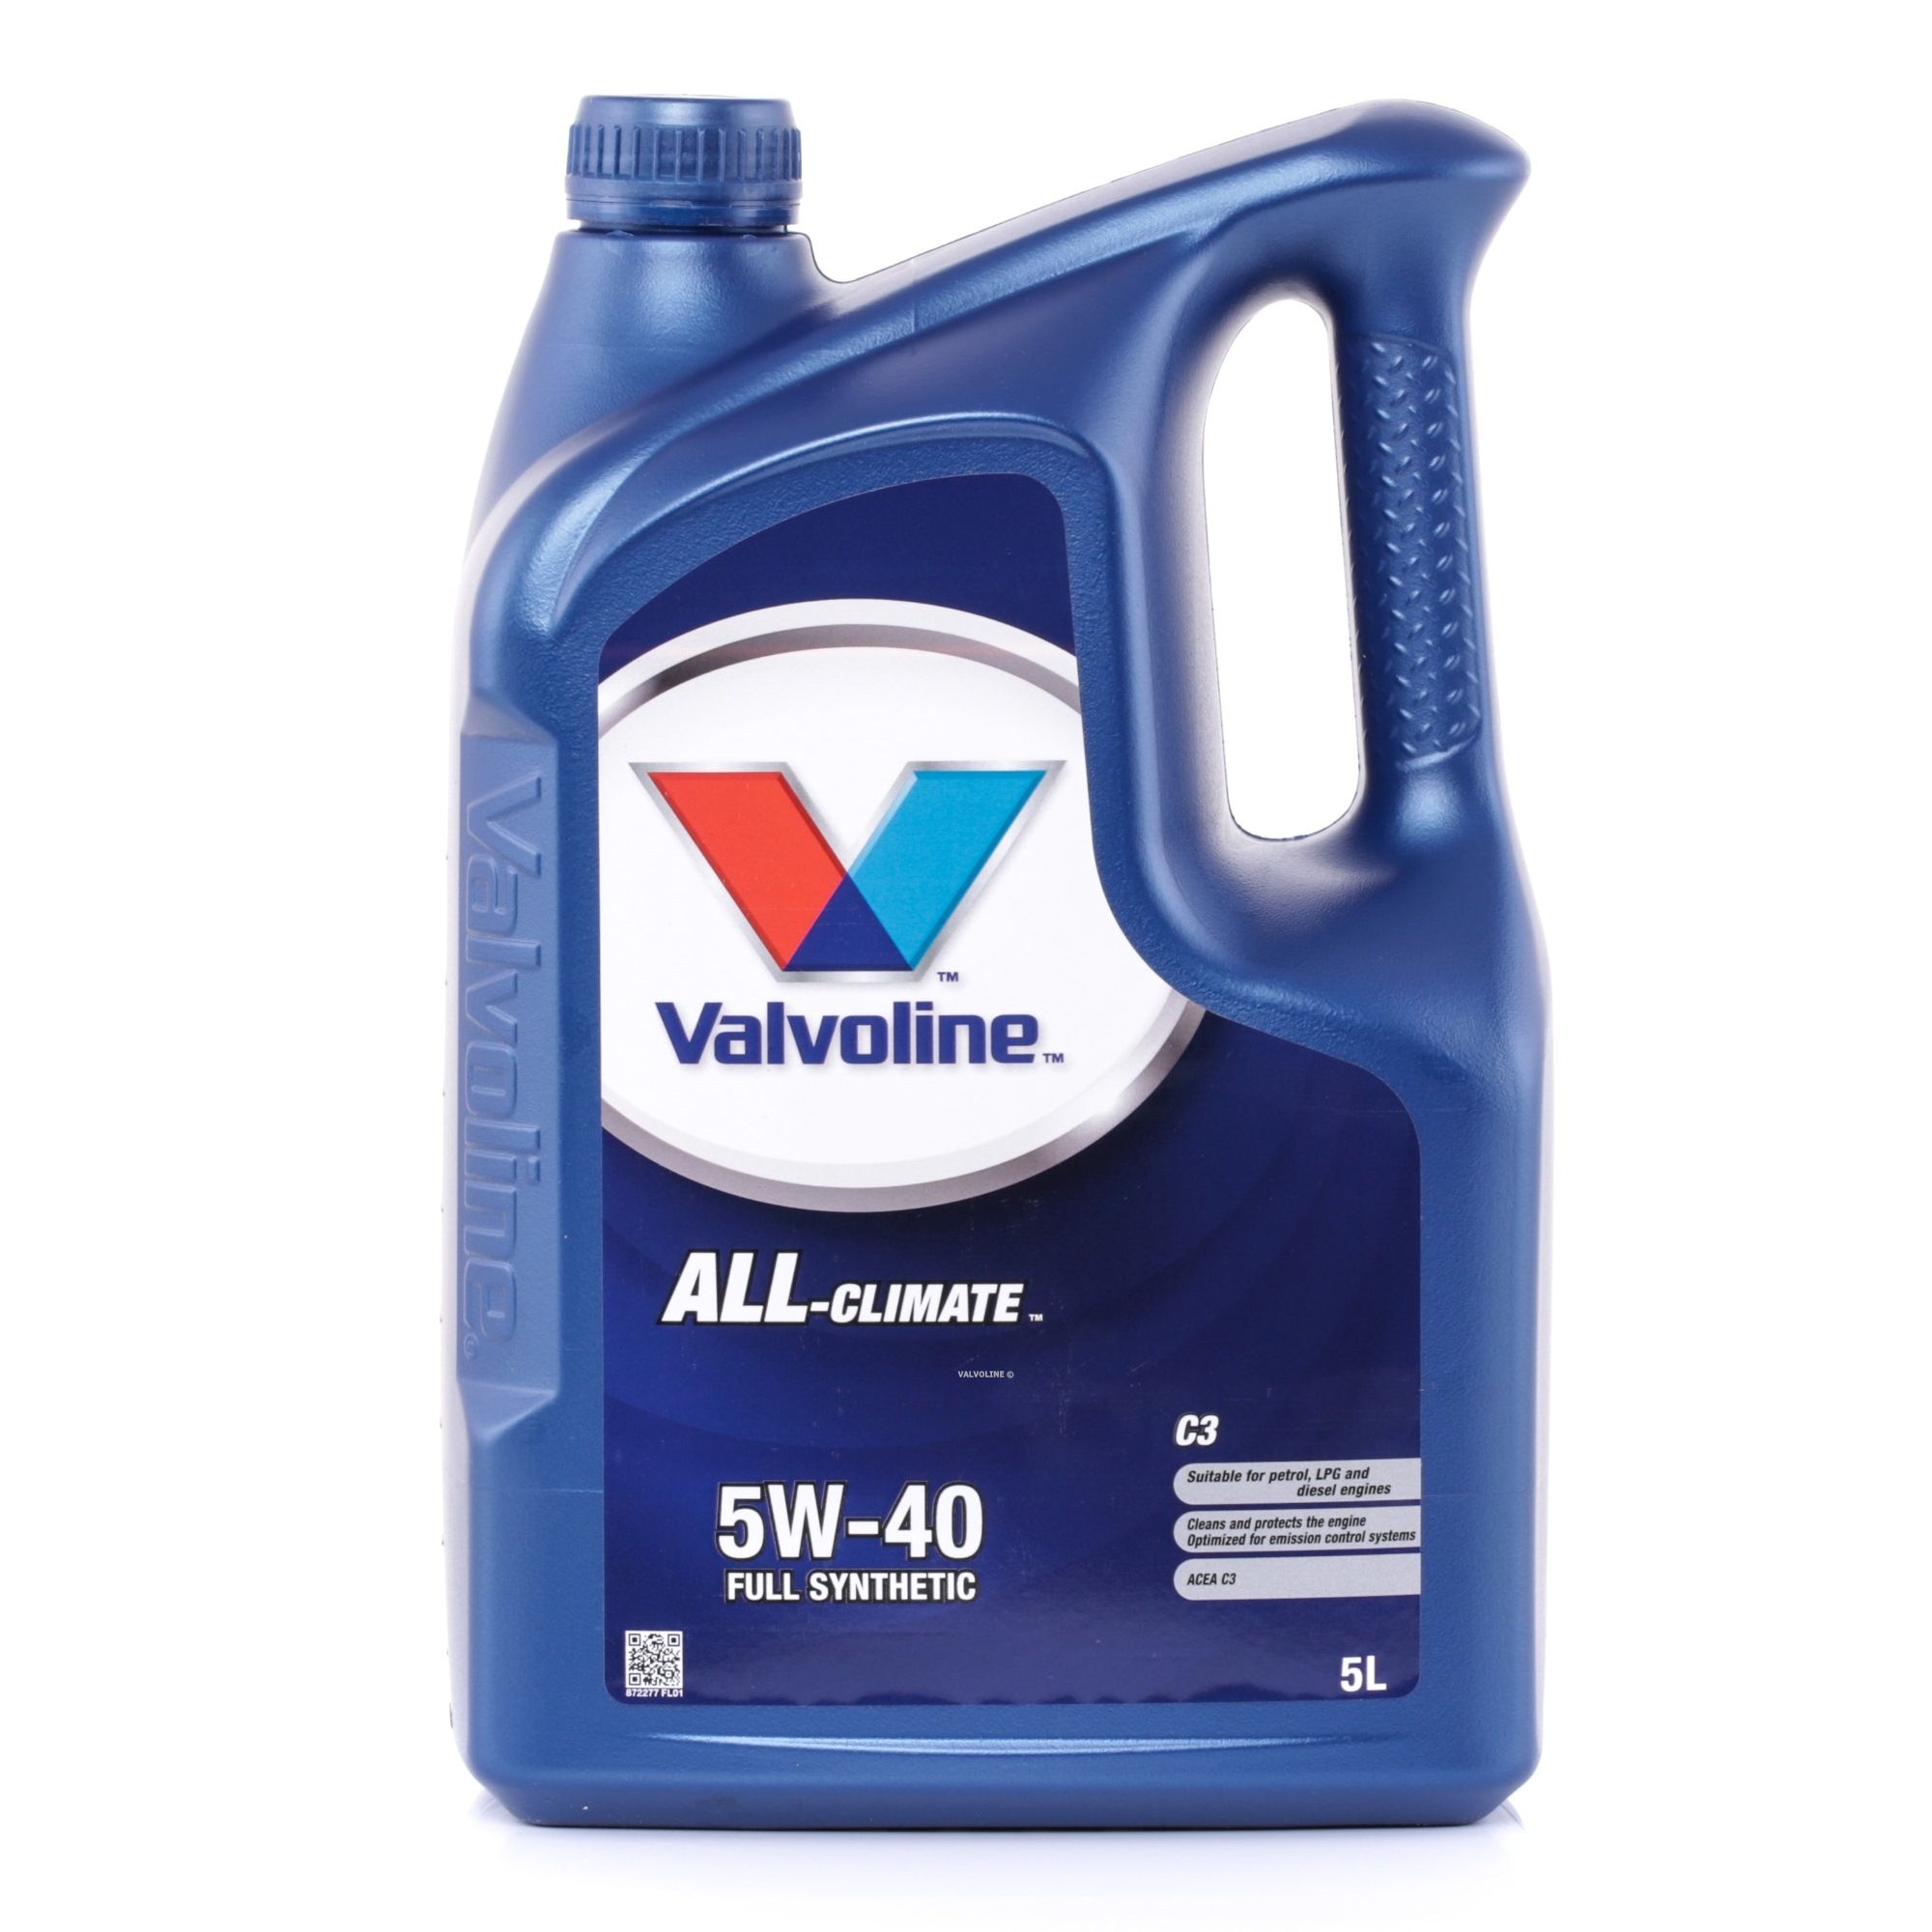 Valvoline All-Climate, C3 872277 Olie 5W-40, 5L, Volledig synthetisch